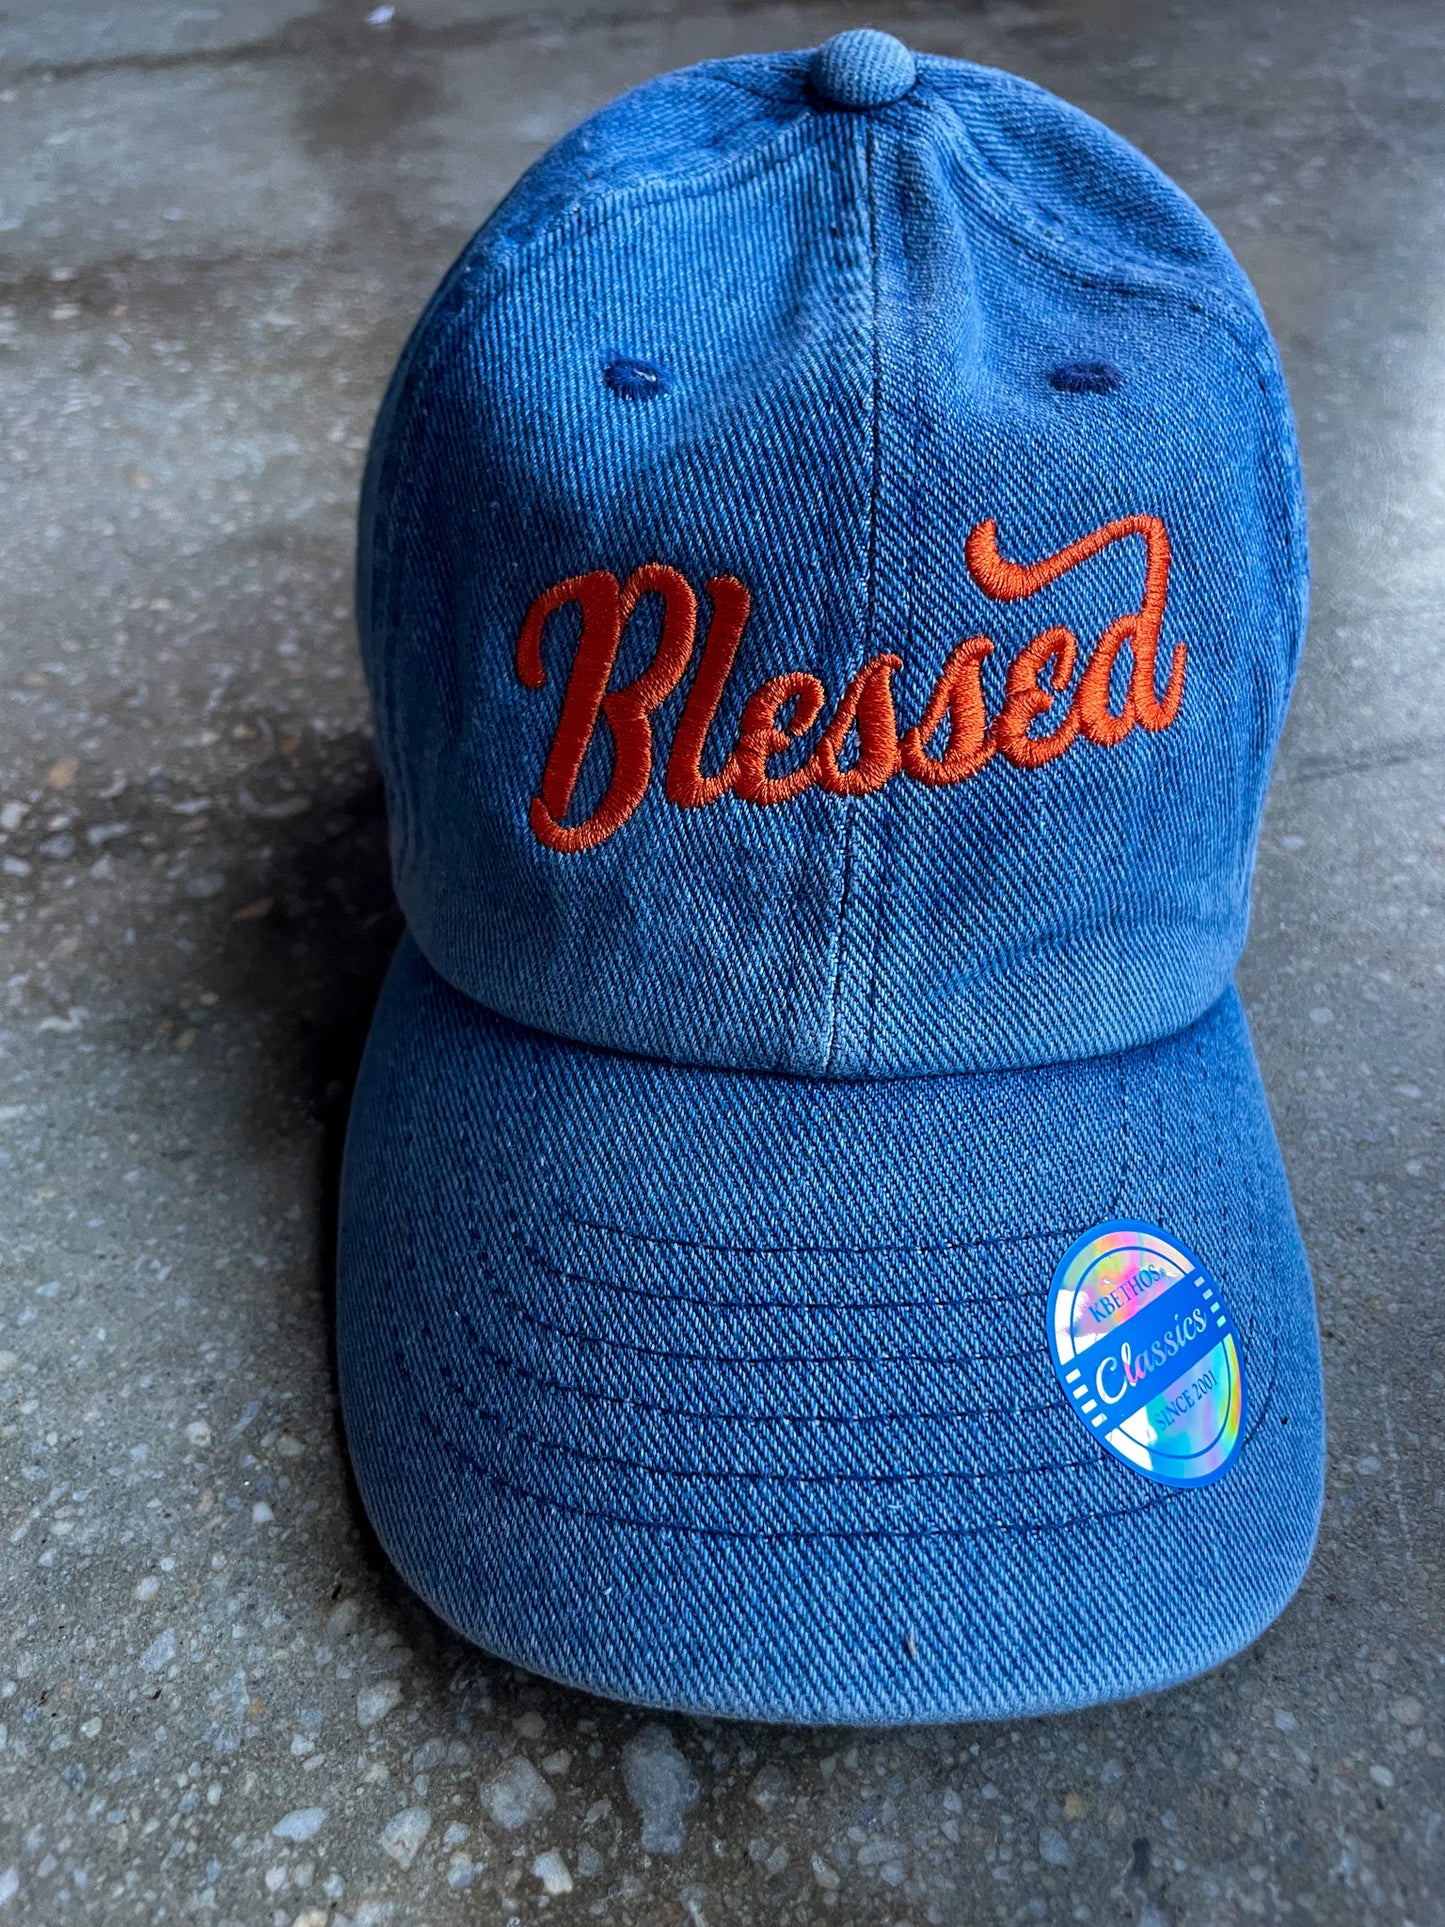 "Blessed" Kid's Hat (Non-distressed)